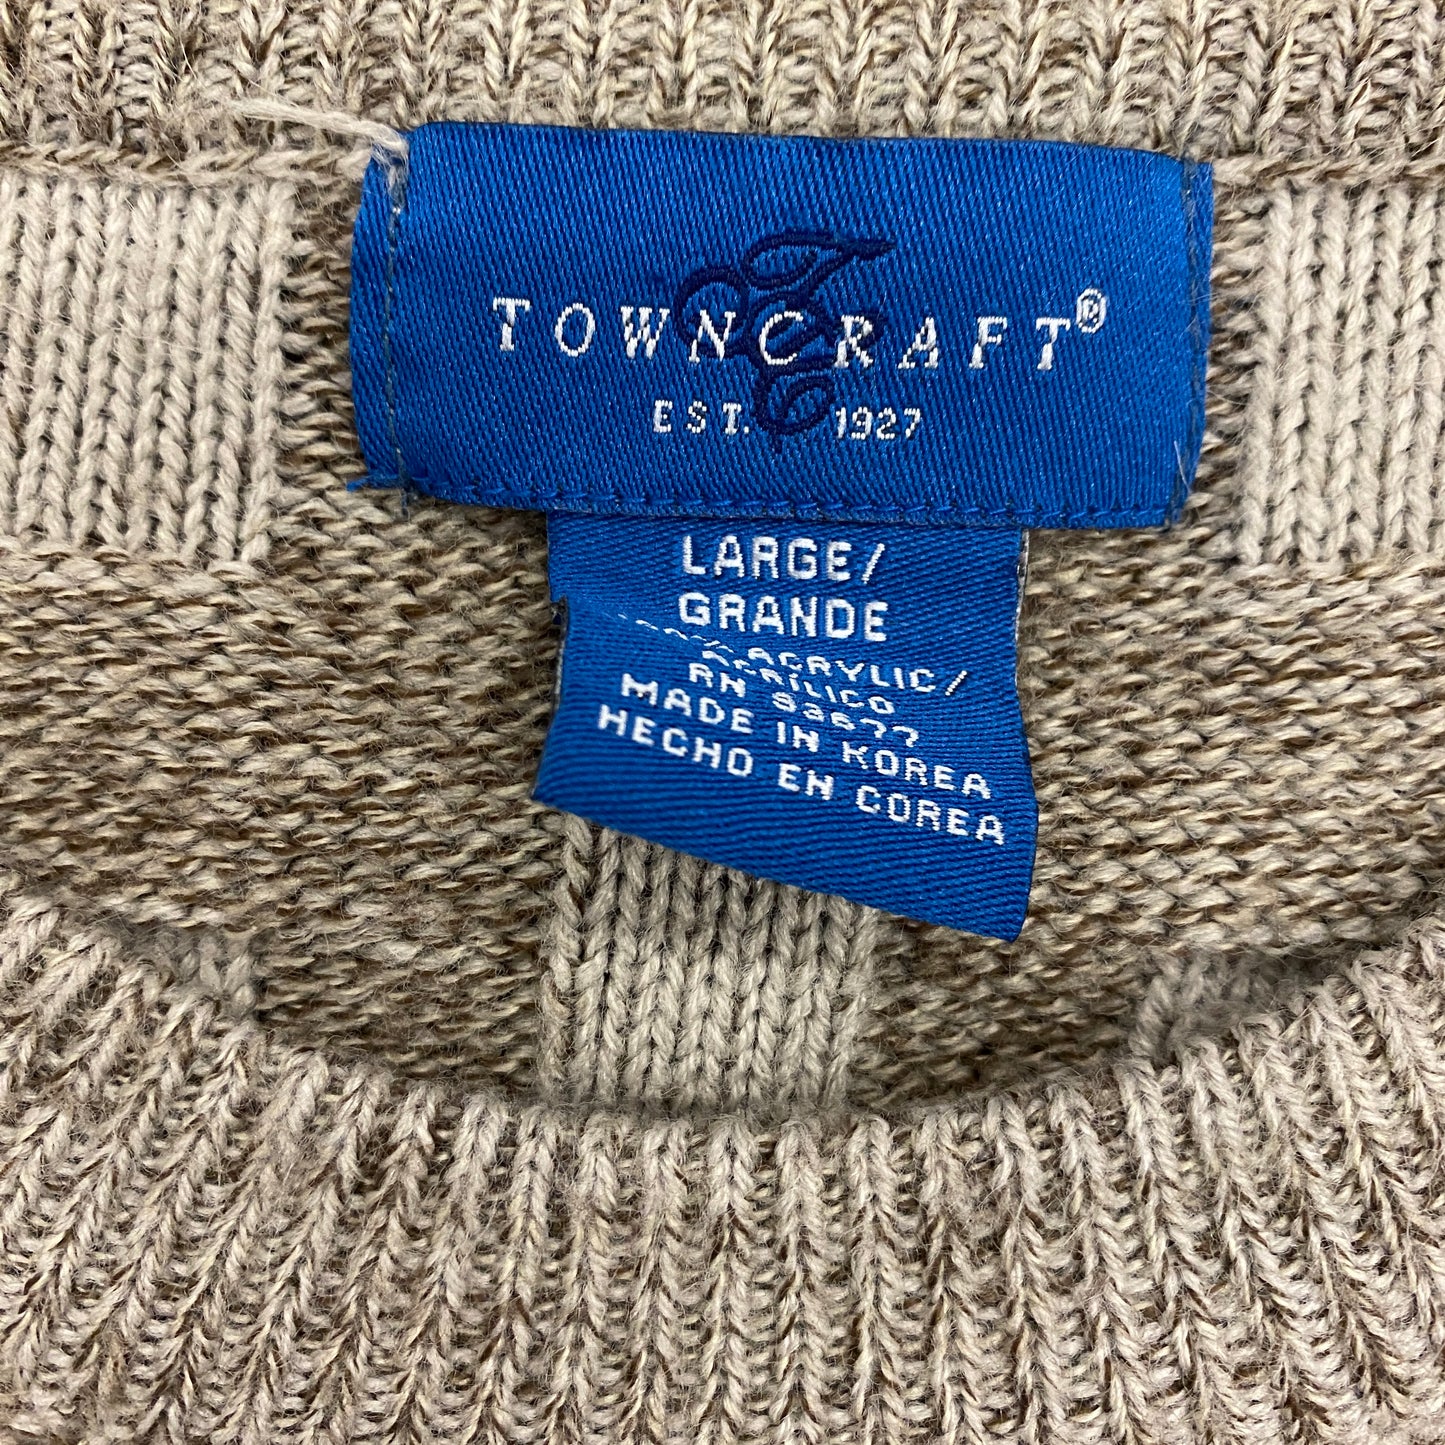 Vintage Towncraft Geometric Knit Sweater - Size Large